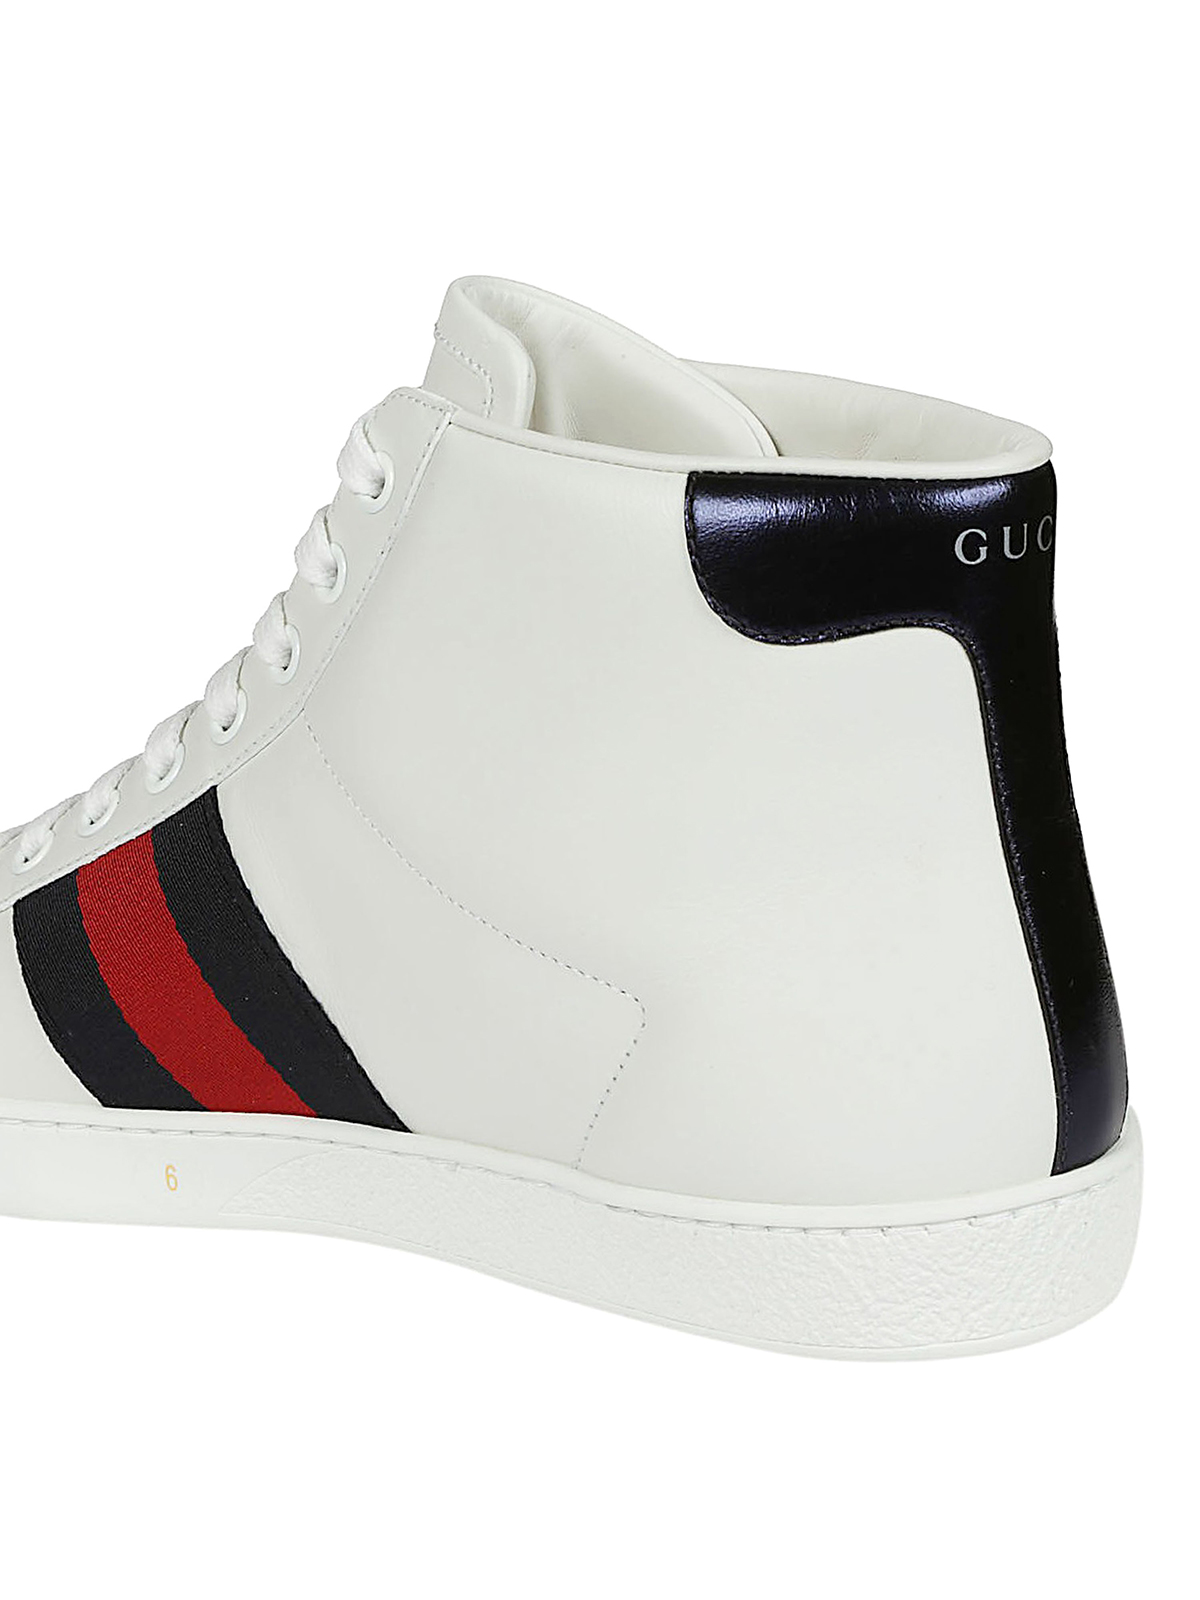 ace high top sneakers